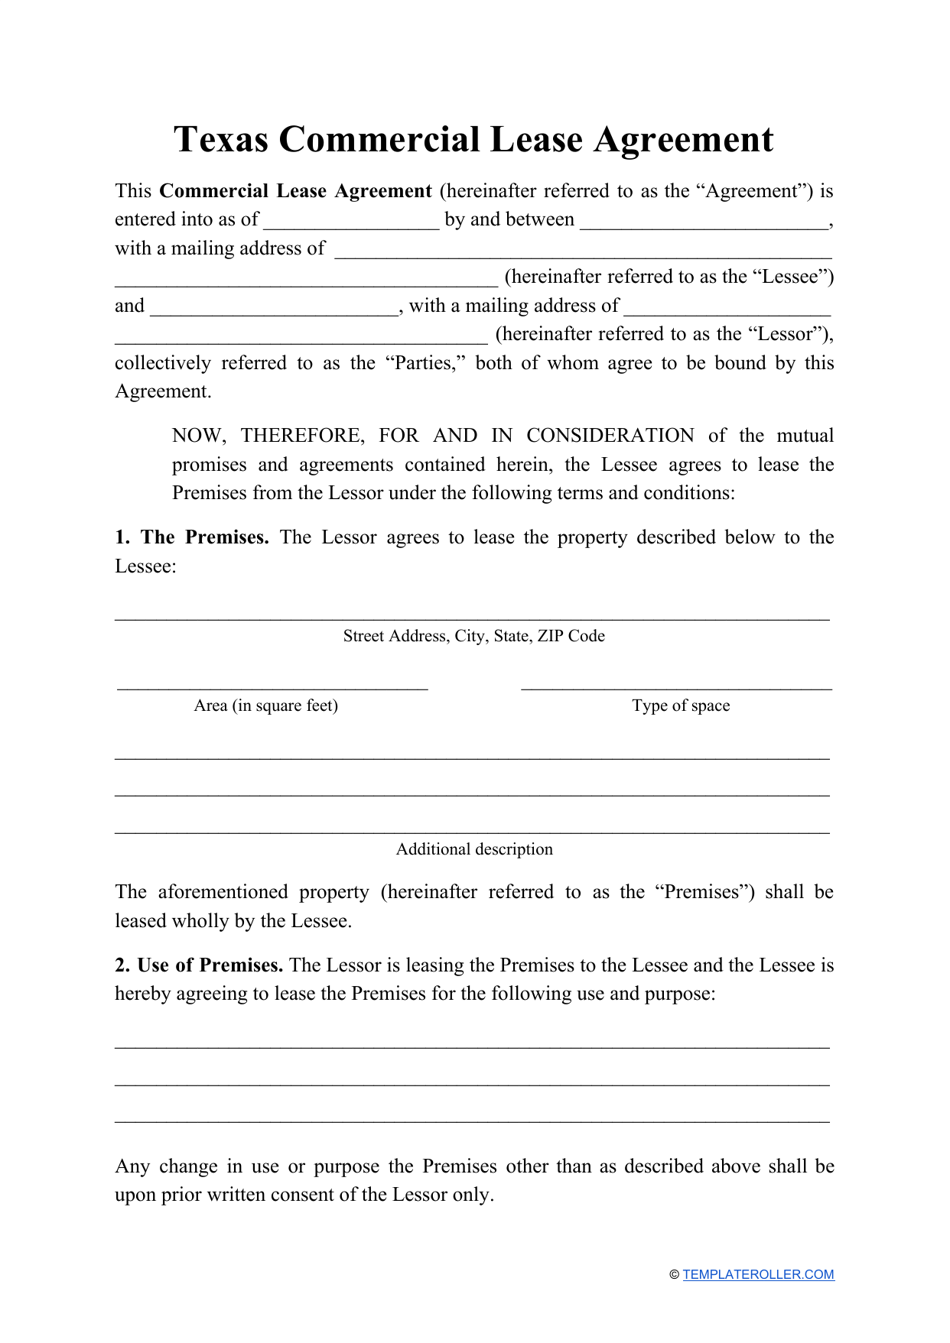 texas commercial lease agreement template download printable pdf